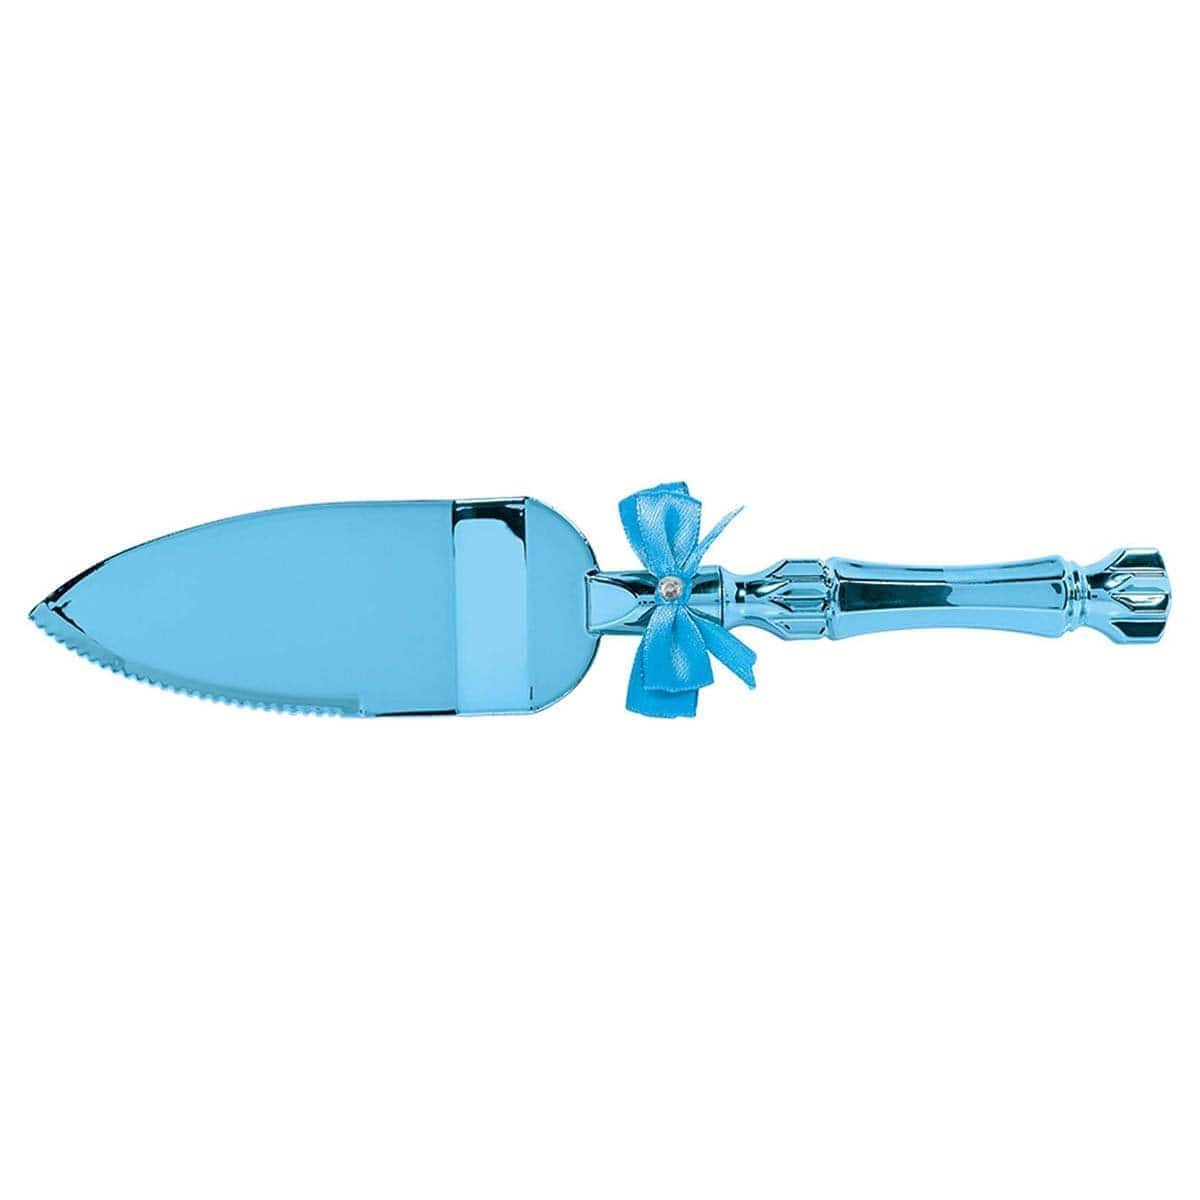 Buy Baby Shower Blue cake server, 10 inches sold at Party Expert